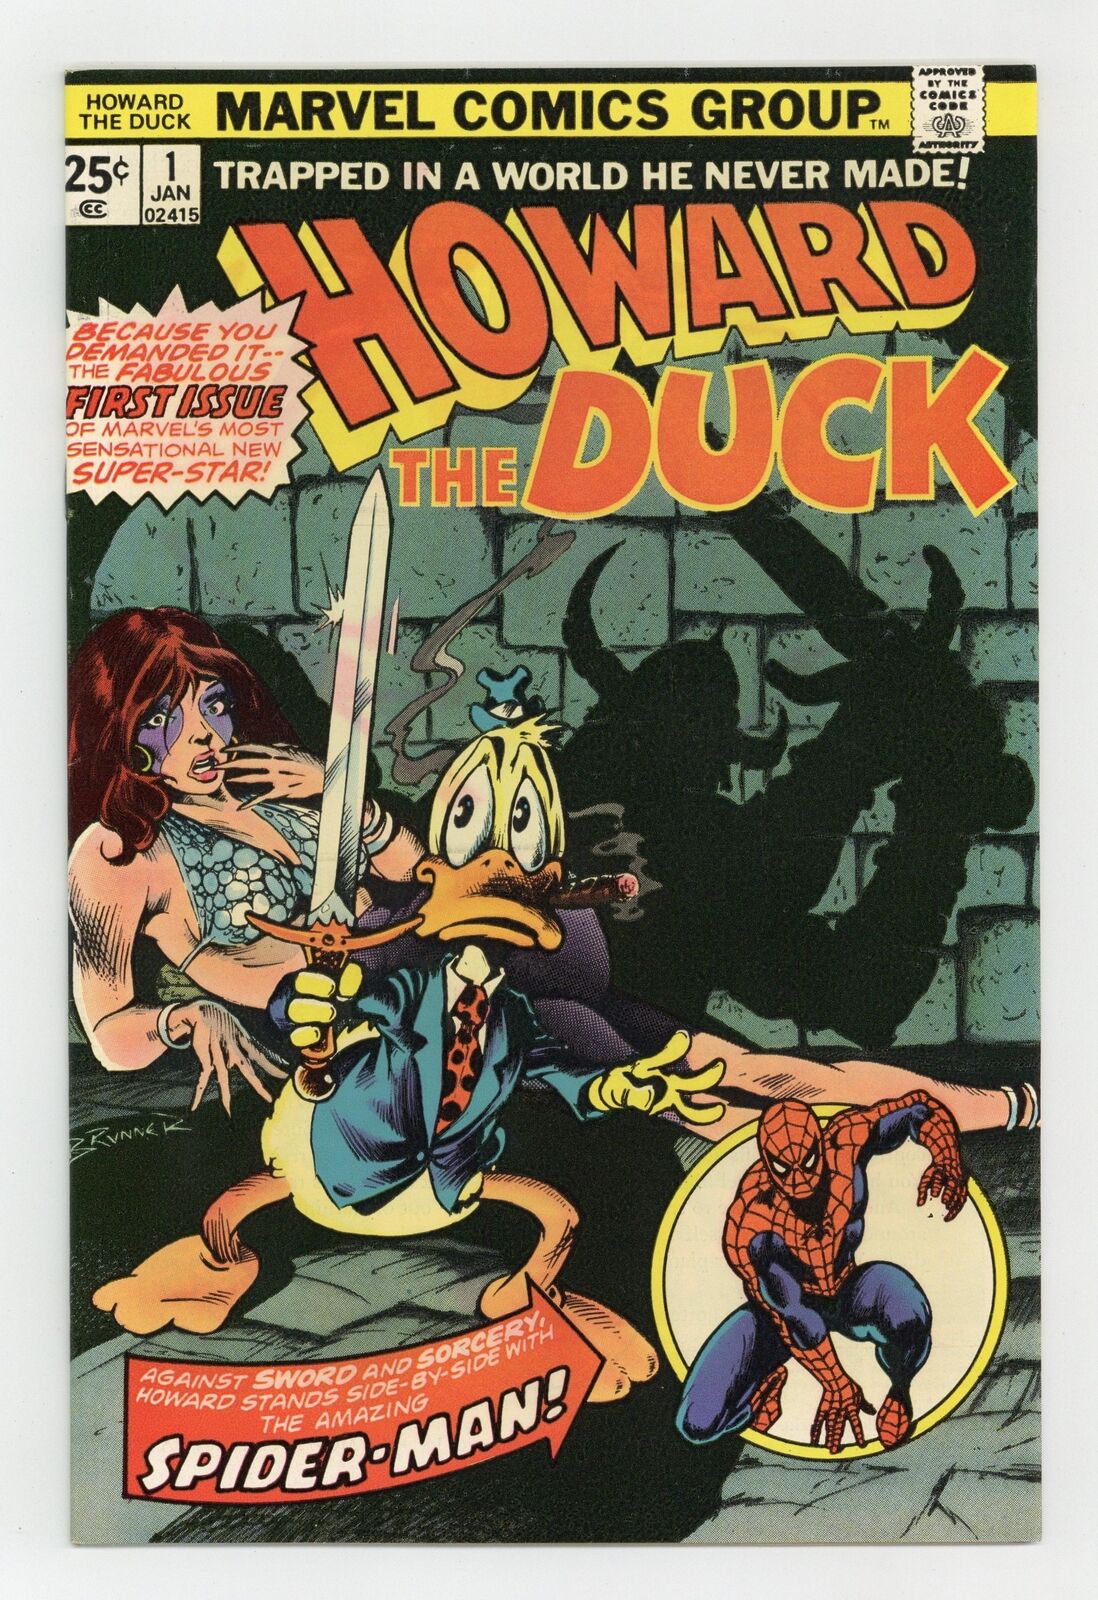 Howard the Duck #1 NM 9.4 1976